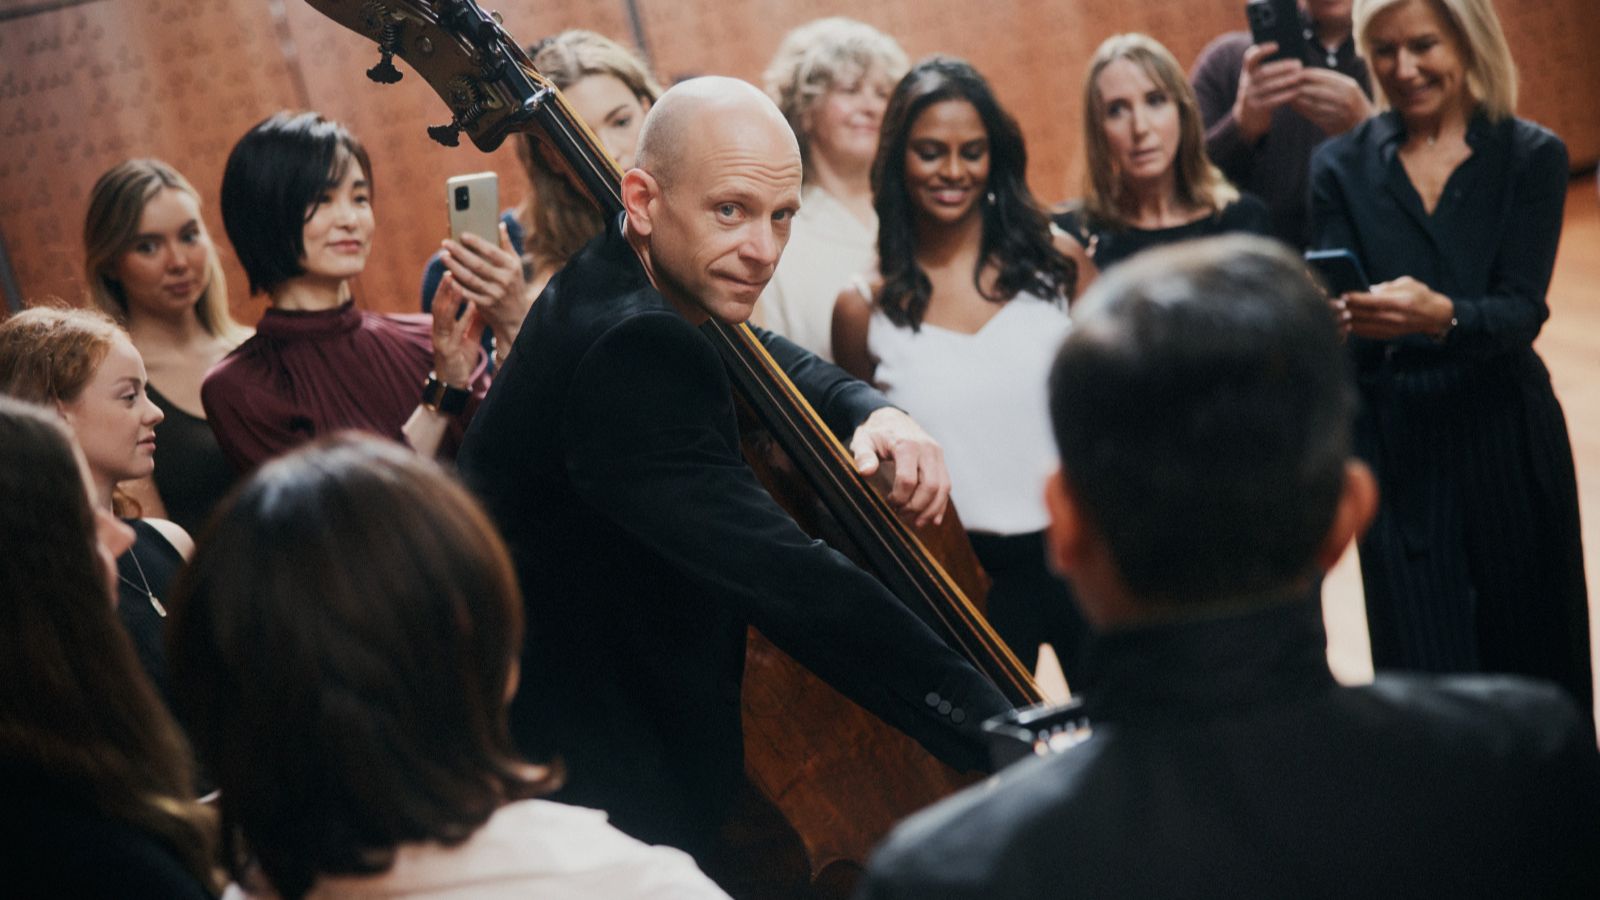 A crowd of people watching a bald man play a bass.